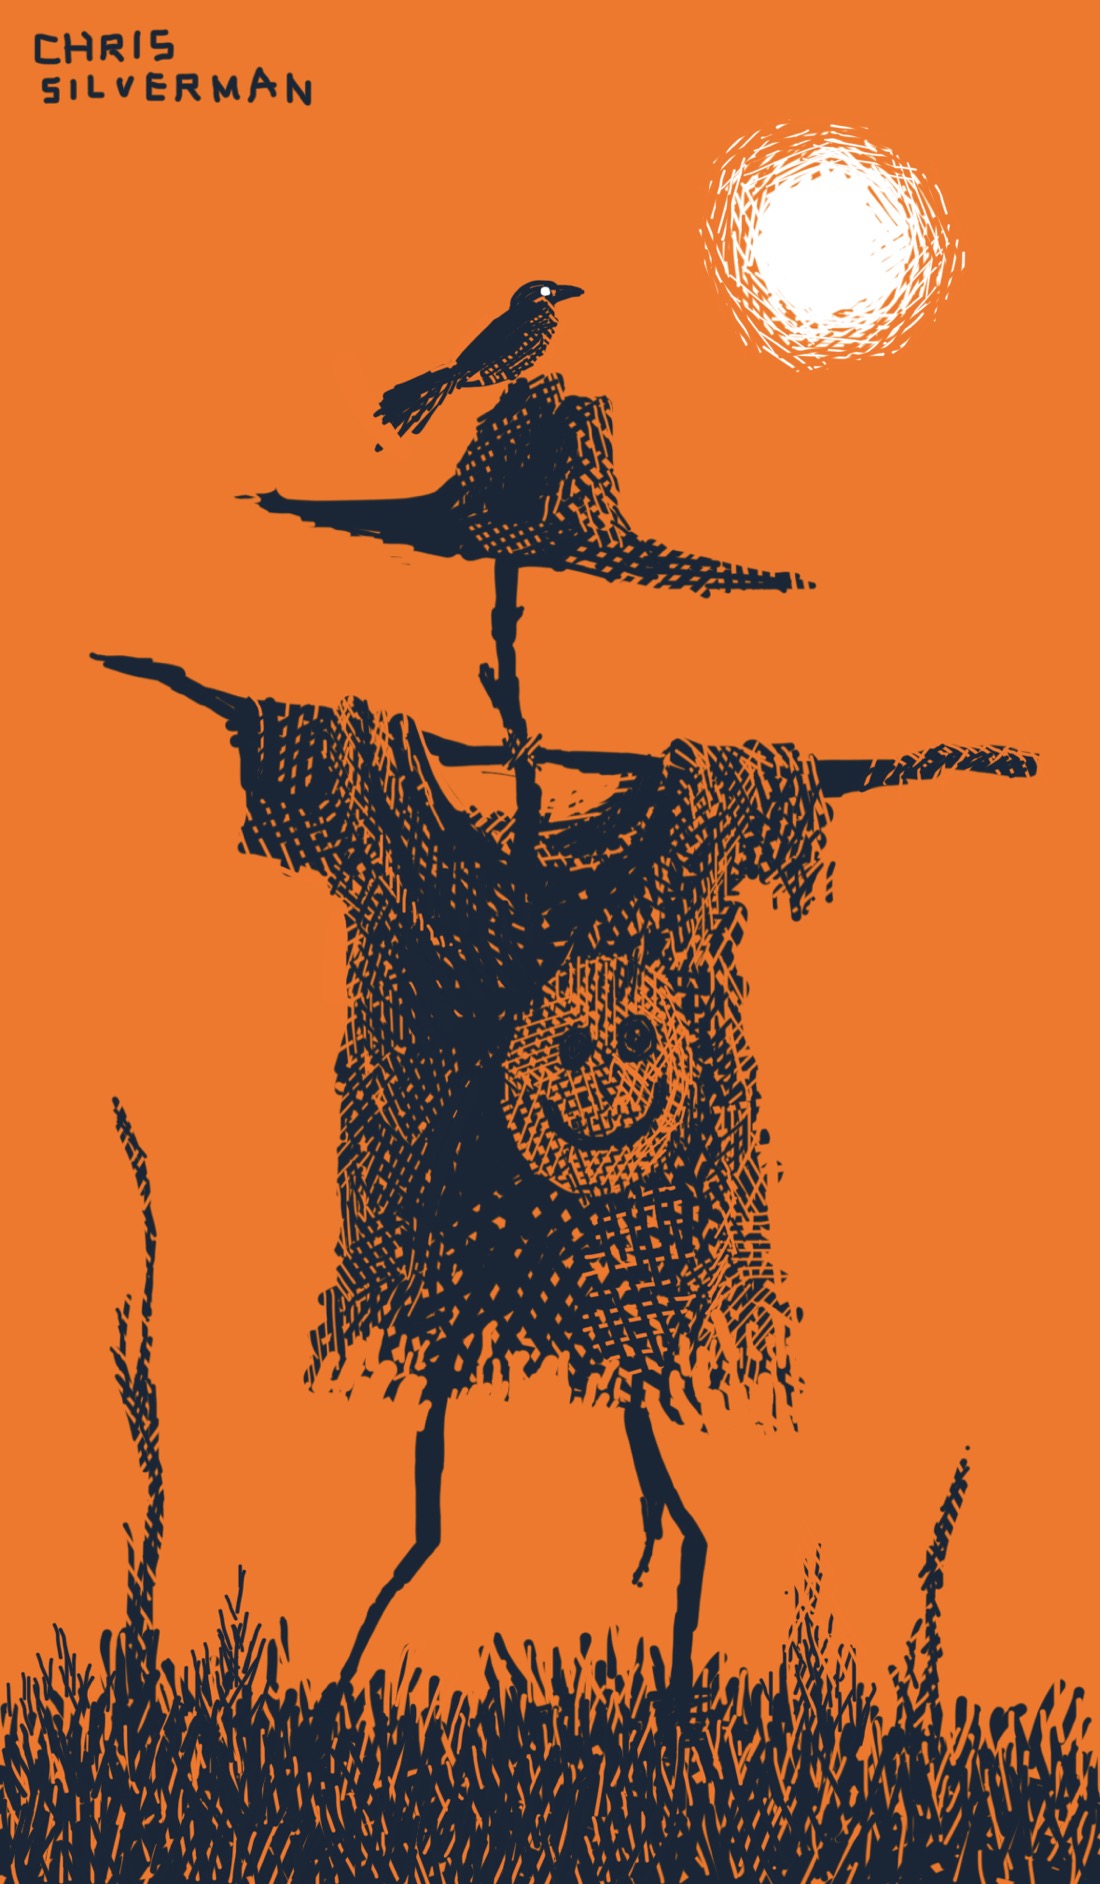 A scarecrow with two stick legs, no head, a large wide-brimmed hat, and a tattered T-shirt with a smiley-face symbol on it. The scarecrow stands under a blazing sun in the middle of a meadow with a couple of stalks nearby. A black bird is perched on the scarecrow's hat. The scarecrow and field are black; the sun is white; the background is orange.